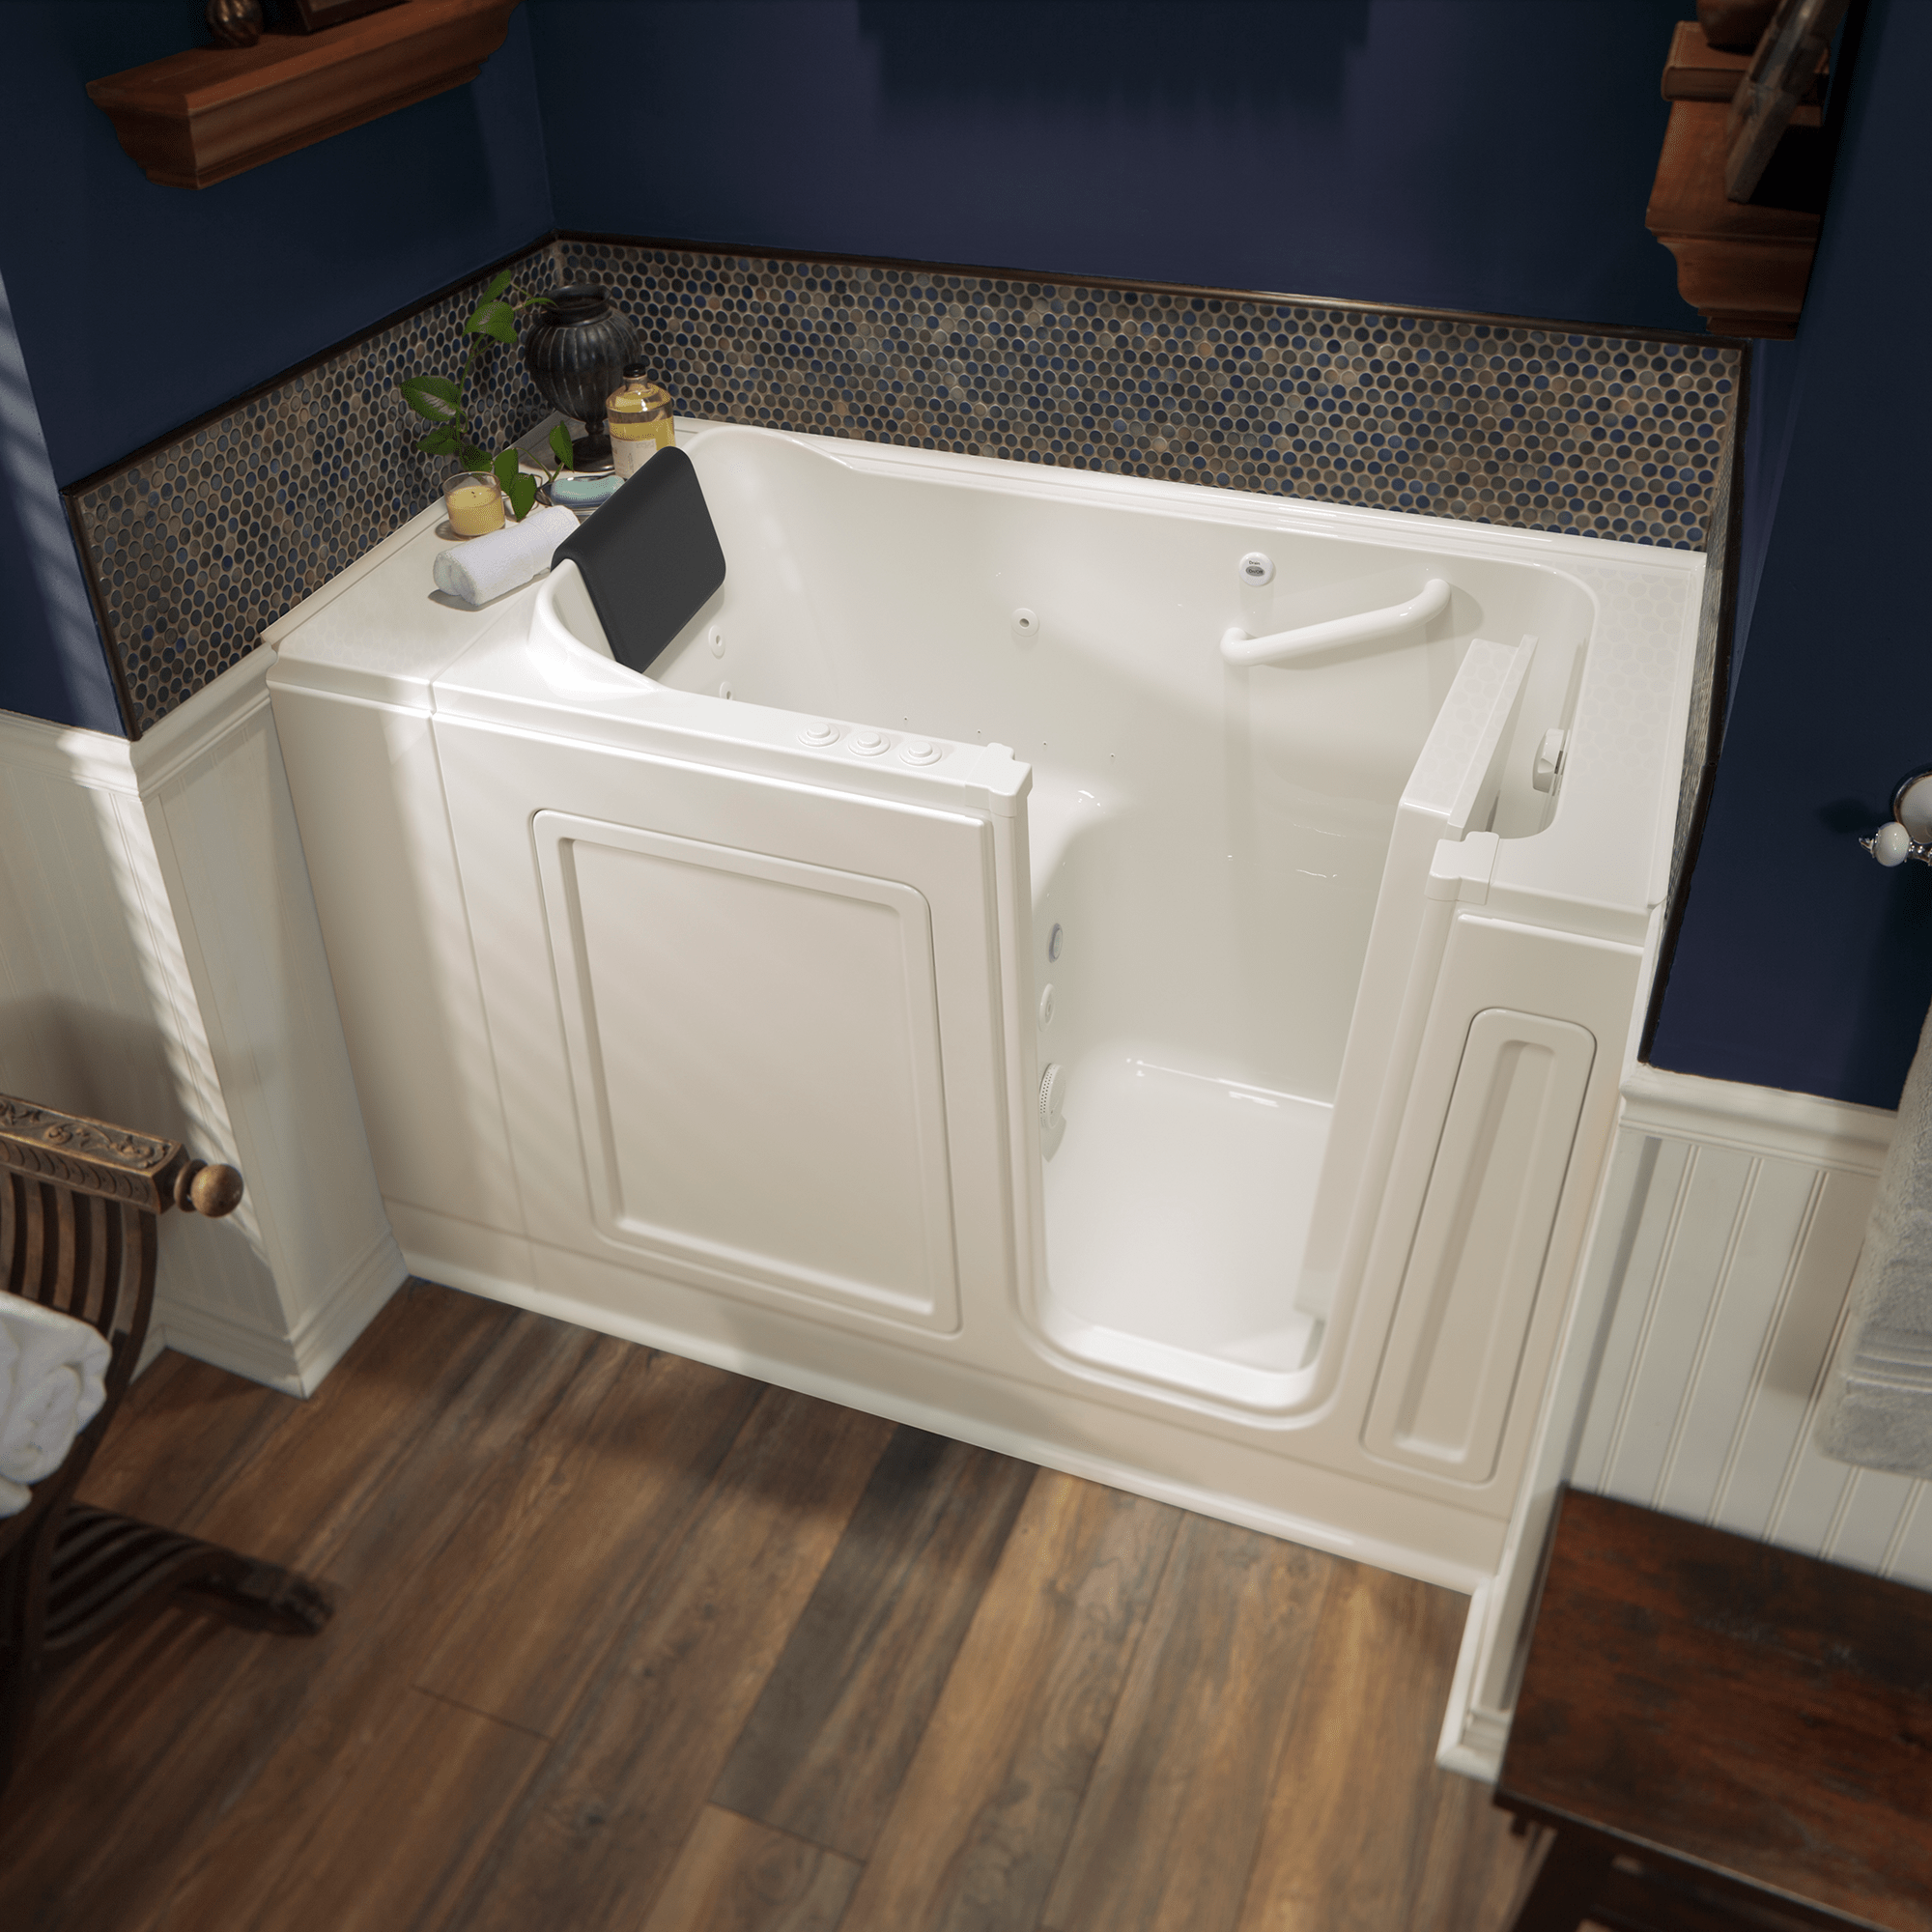 Acrylic Luxury Series 28 x 48-Inch Walk-in Tub With Combination Air Spa and Whirlpool Systems - Right-Hand Drain